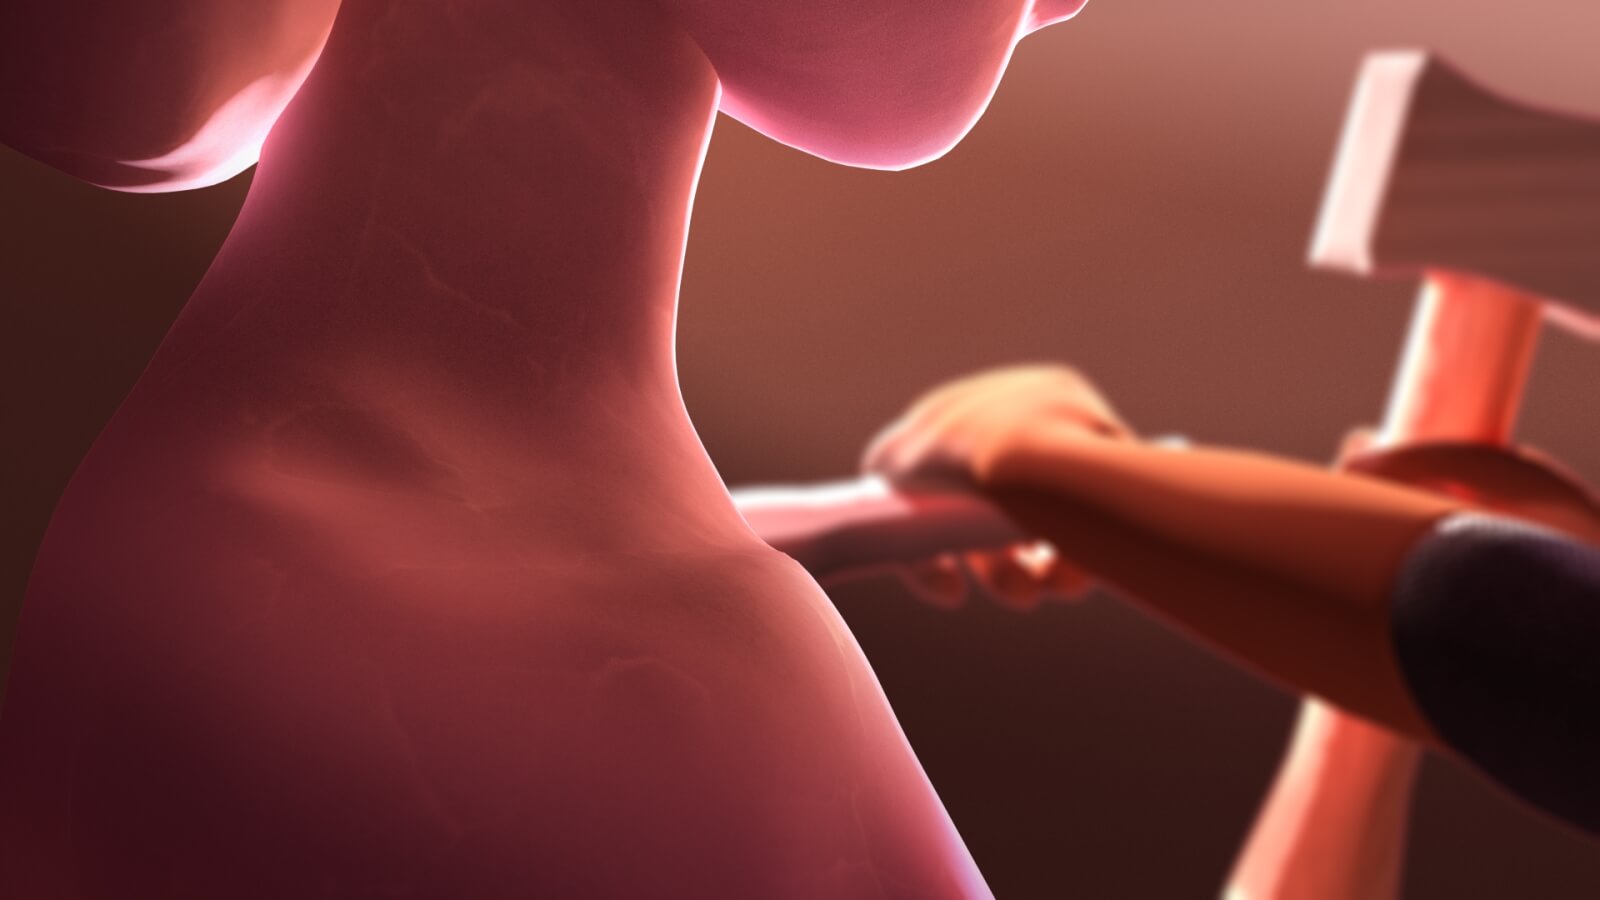 A close-up of a pinkish abstract figure being sculpted with a chisel and hammer by a hand dressed in an orange sleeve.